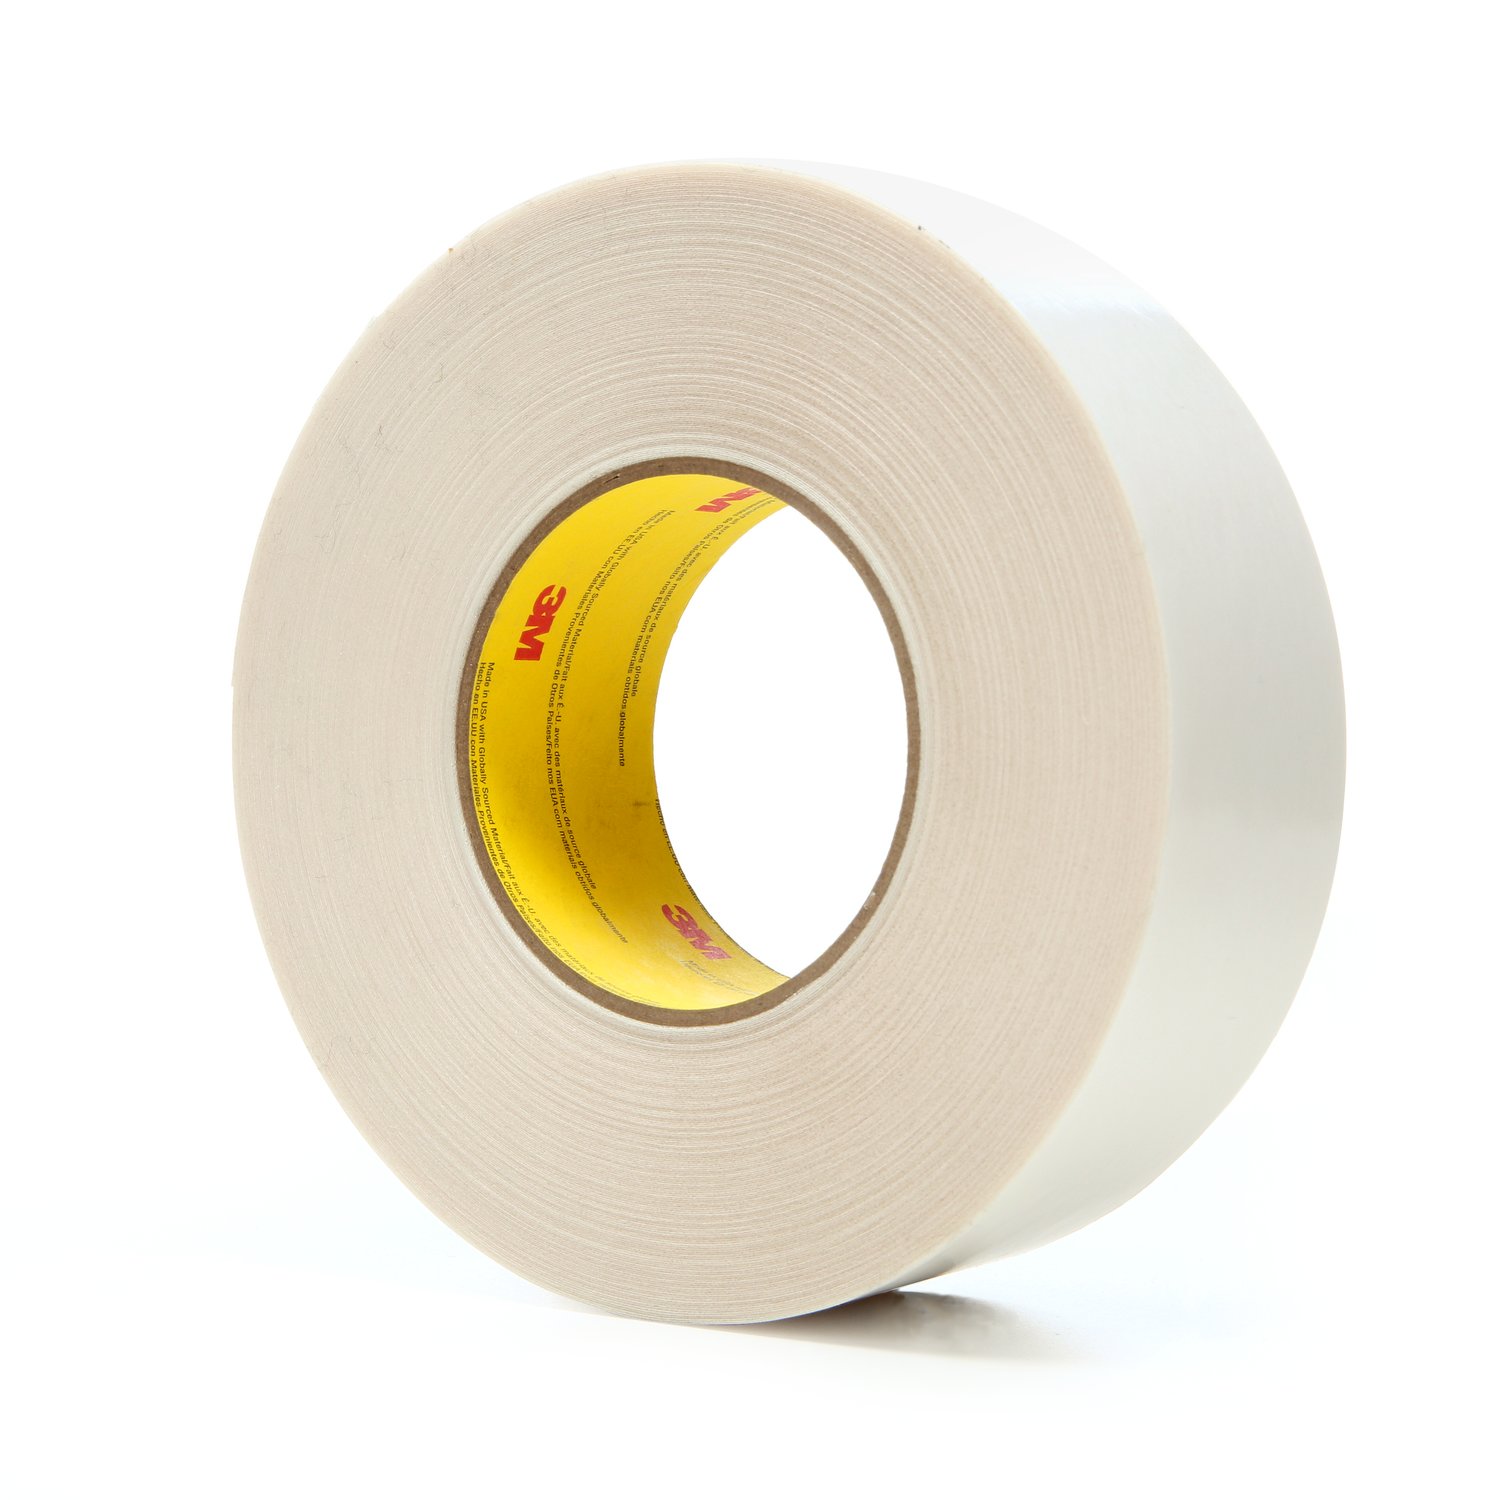 7100138377 - 3M Double Coated Tape 9741, Clear, 48 mm x 55 m, 6.5 mil, 24 rolls per
case